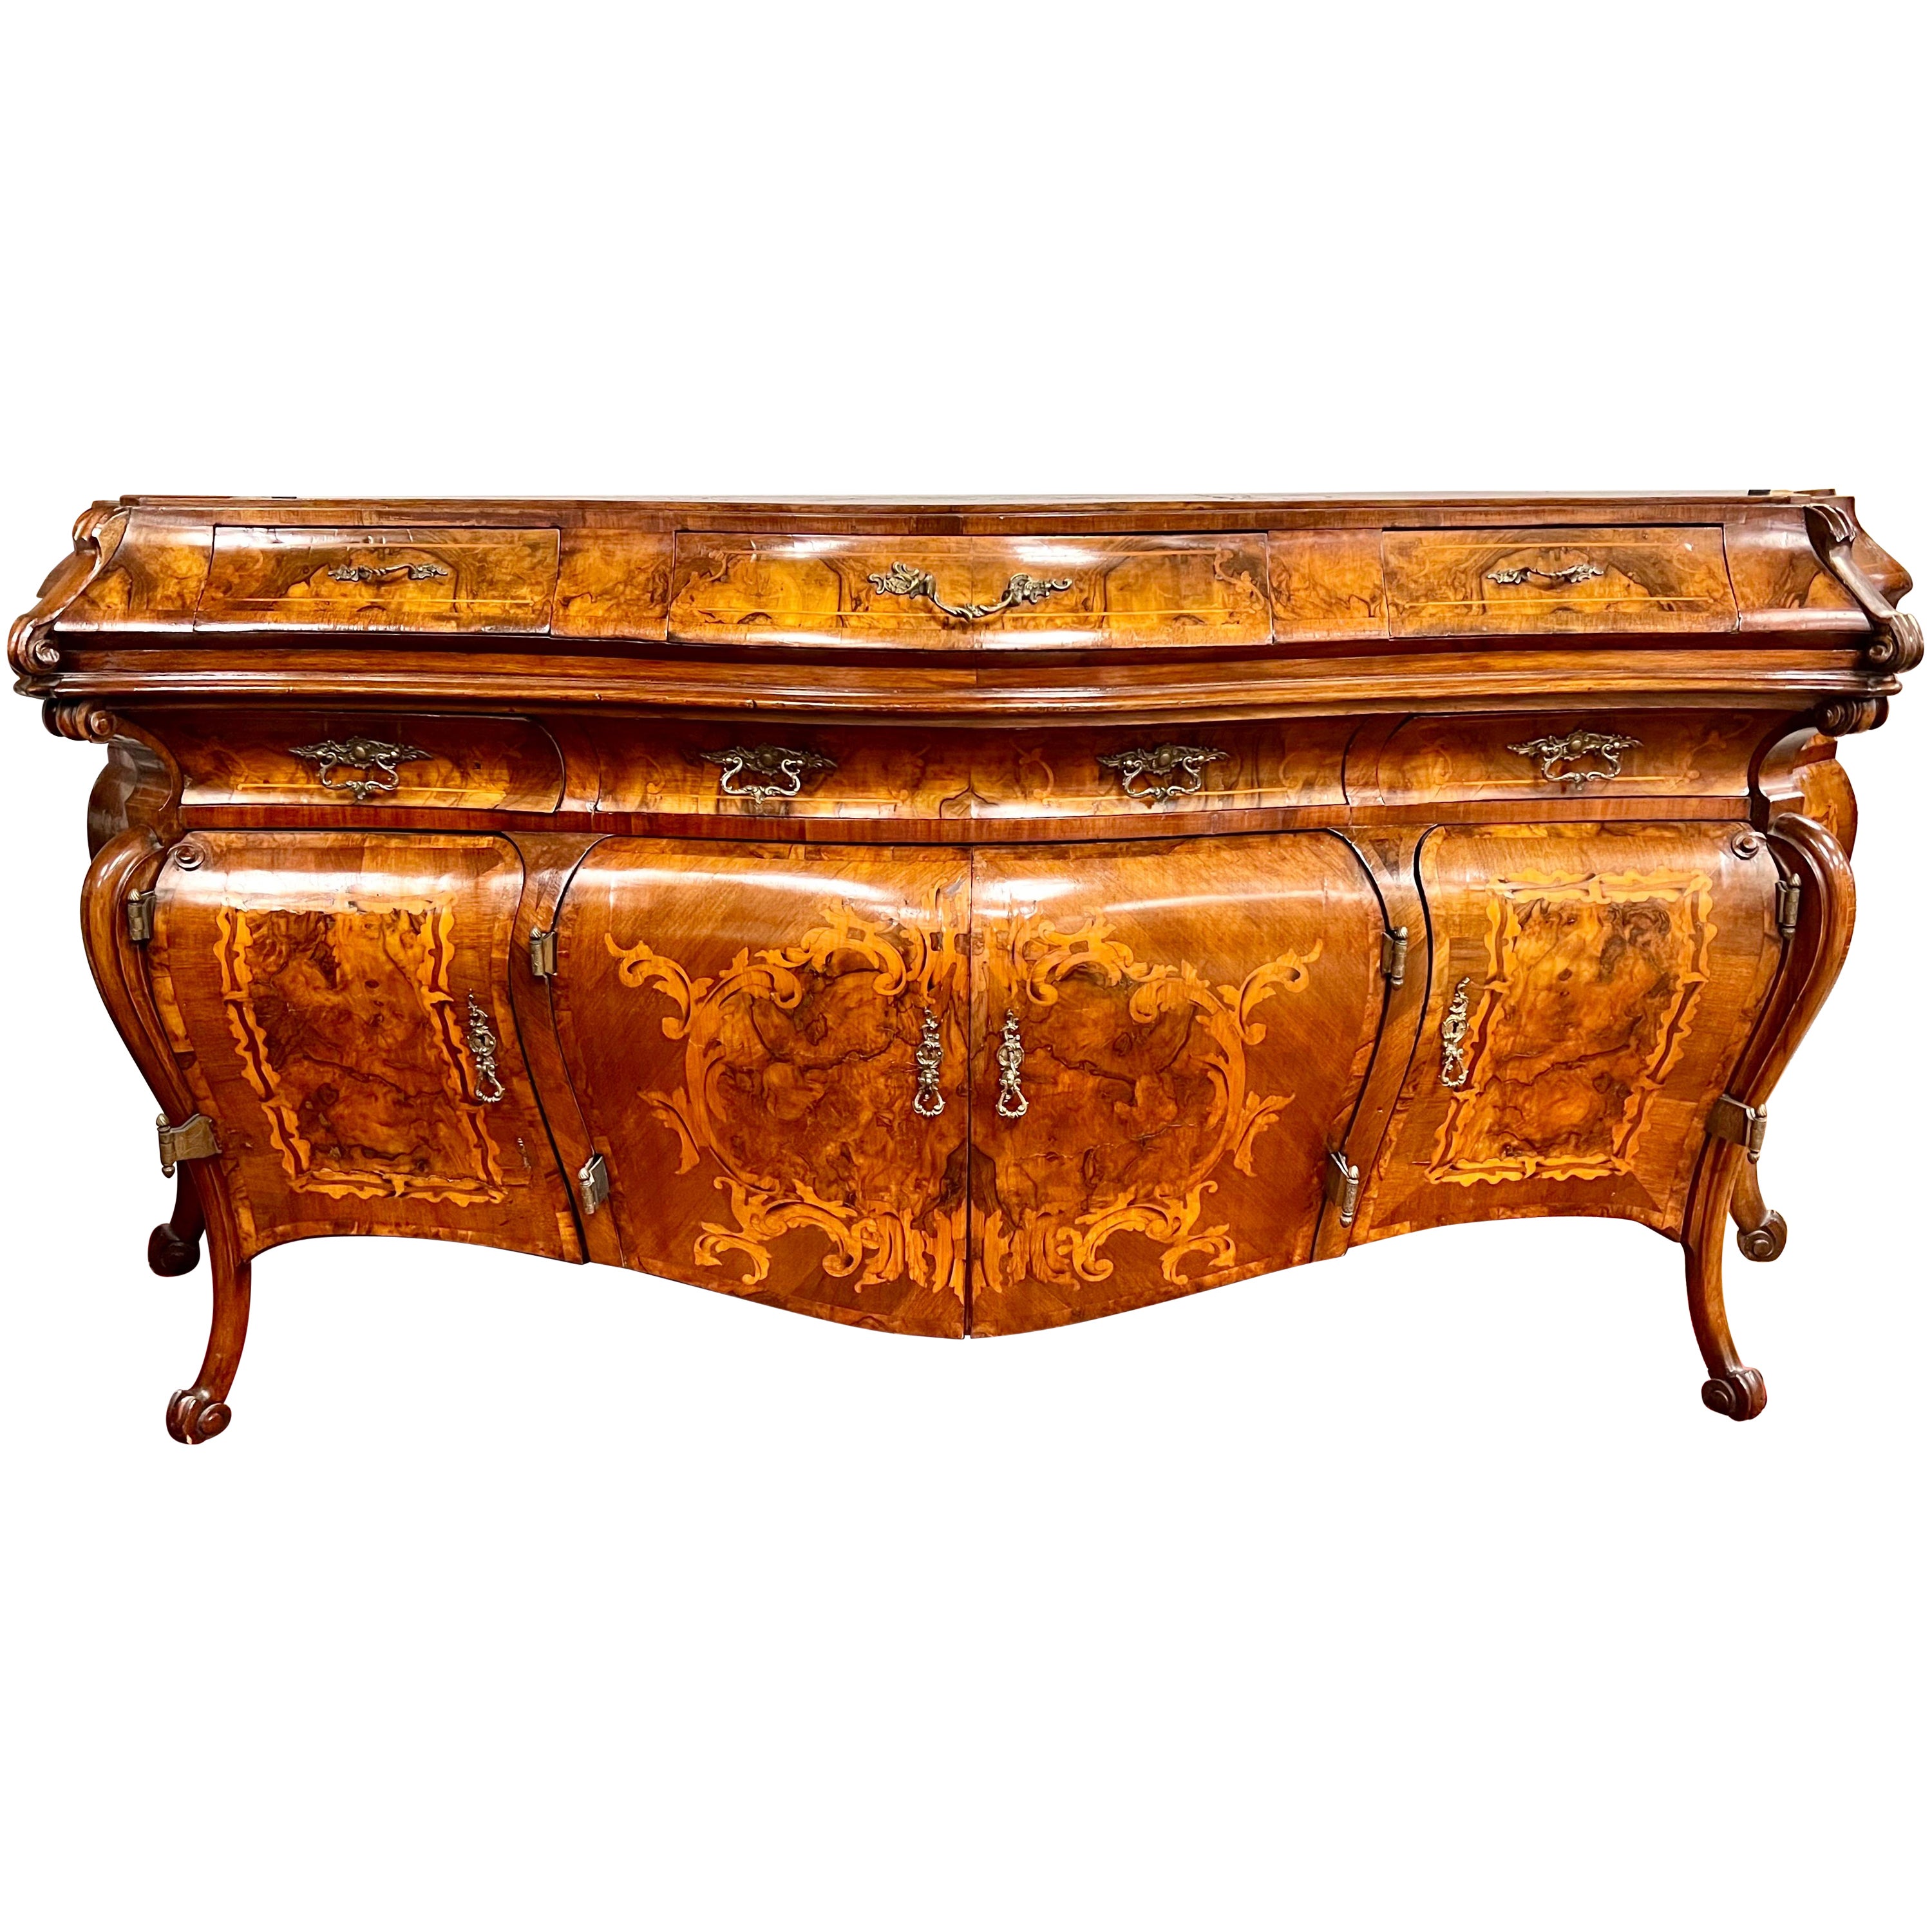 Antique 19th Century Burr Walnut Marquetry French Bombe 8FT Sideboard Buffet